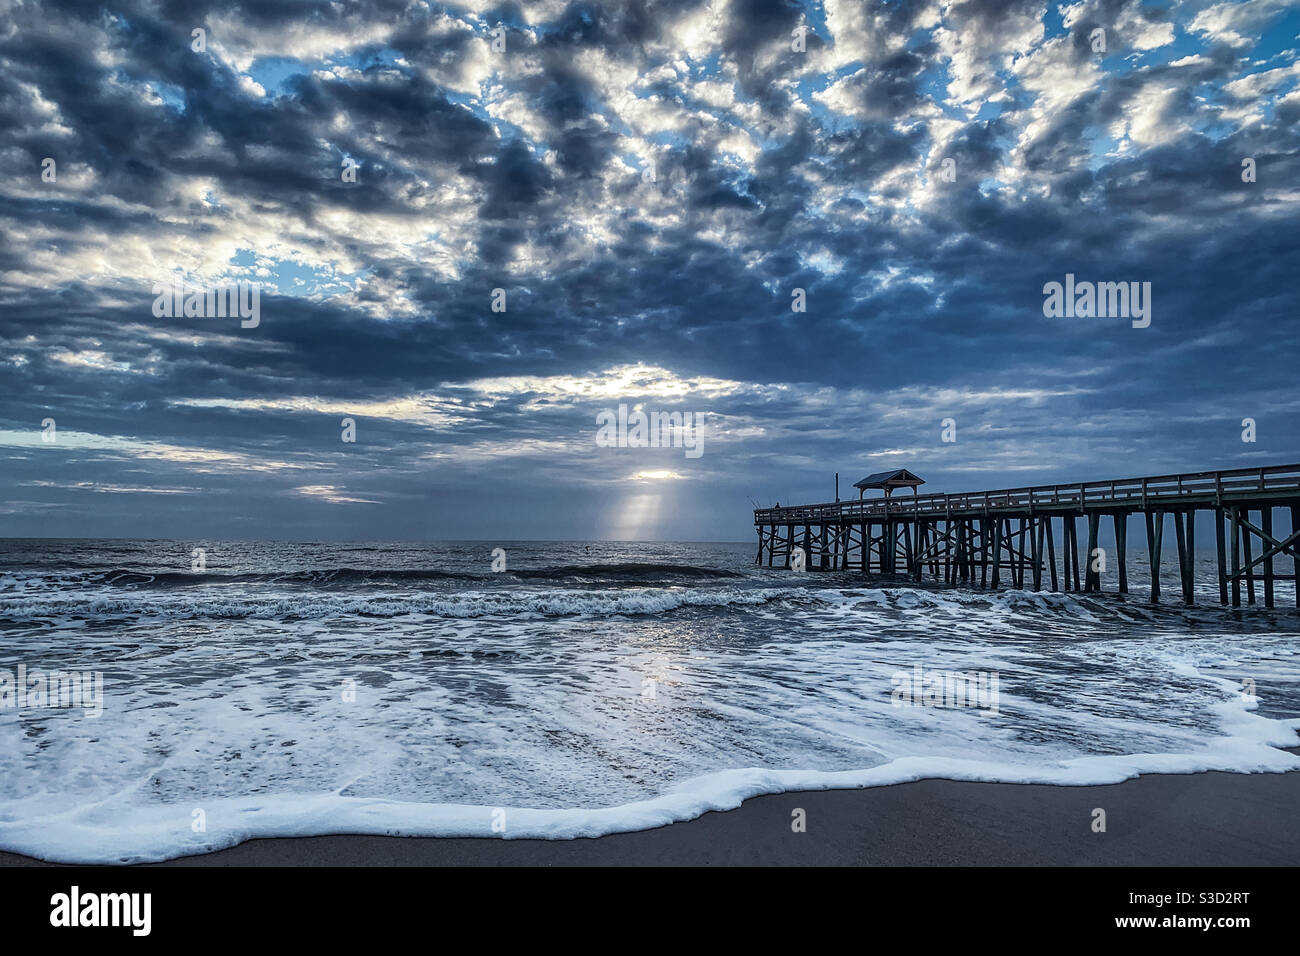 Crepuscular rays shining through the clouds over the Amelia Island beach pier with ocean waves rolling in. Stock Photo